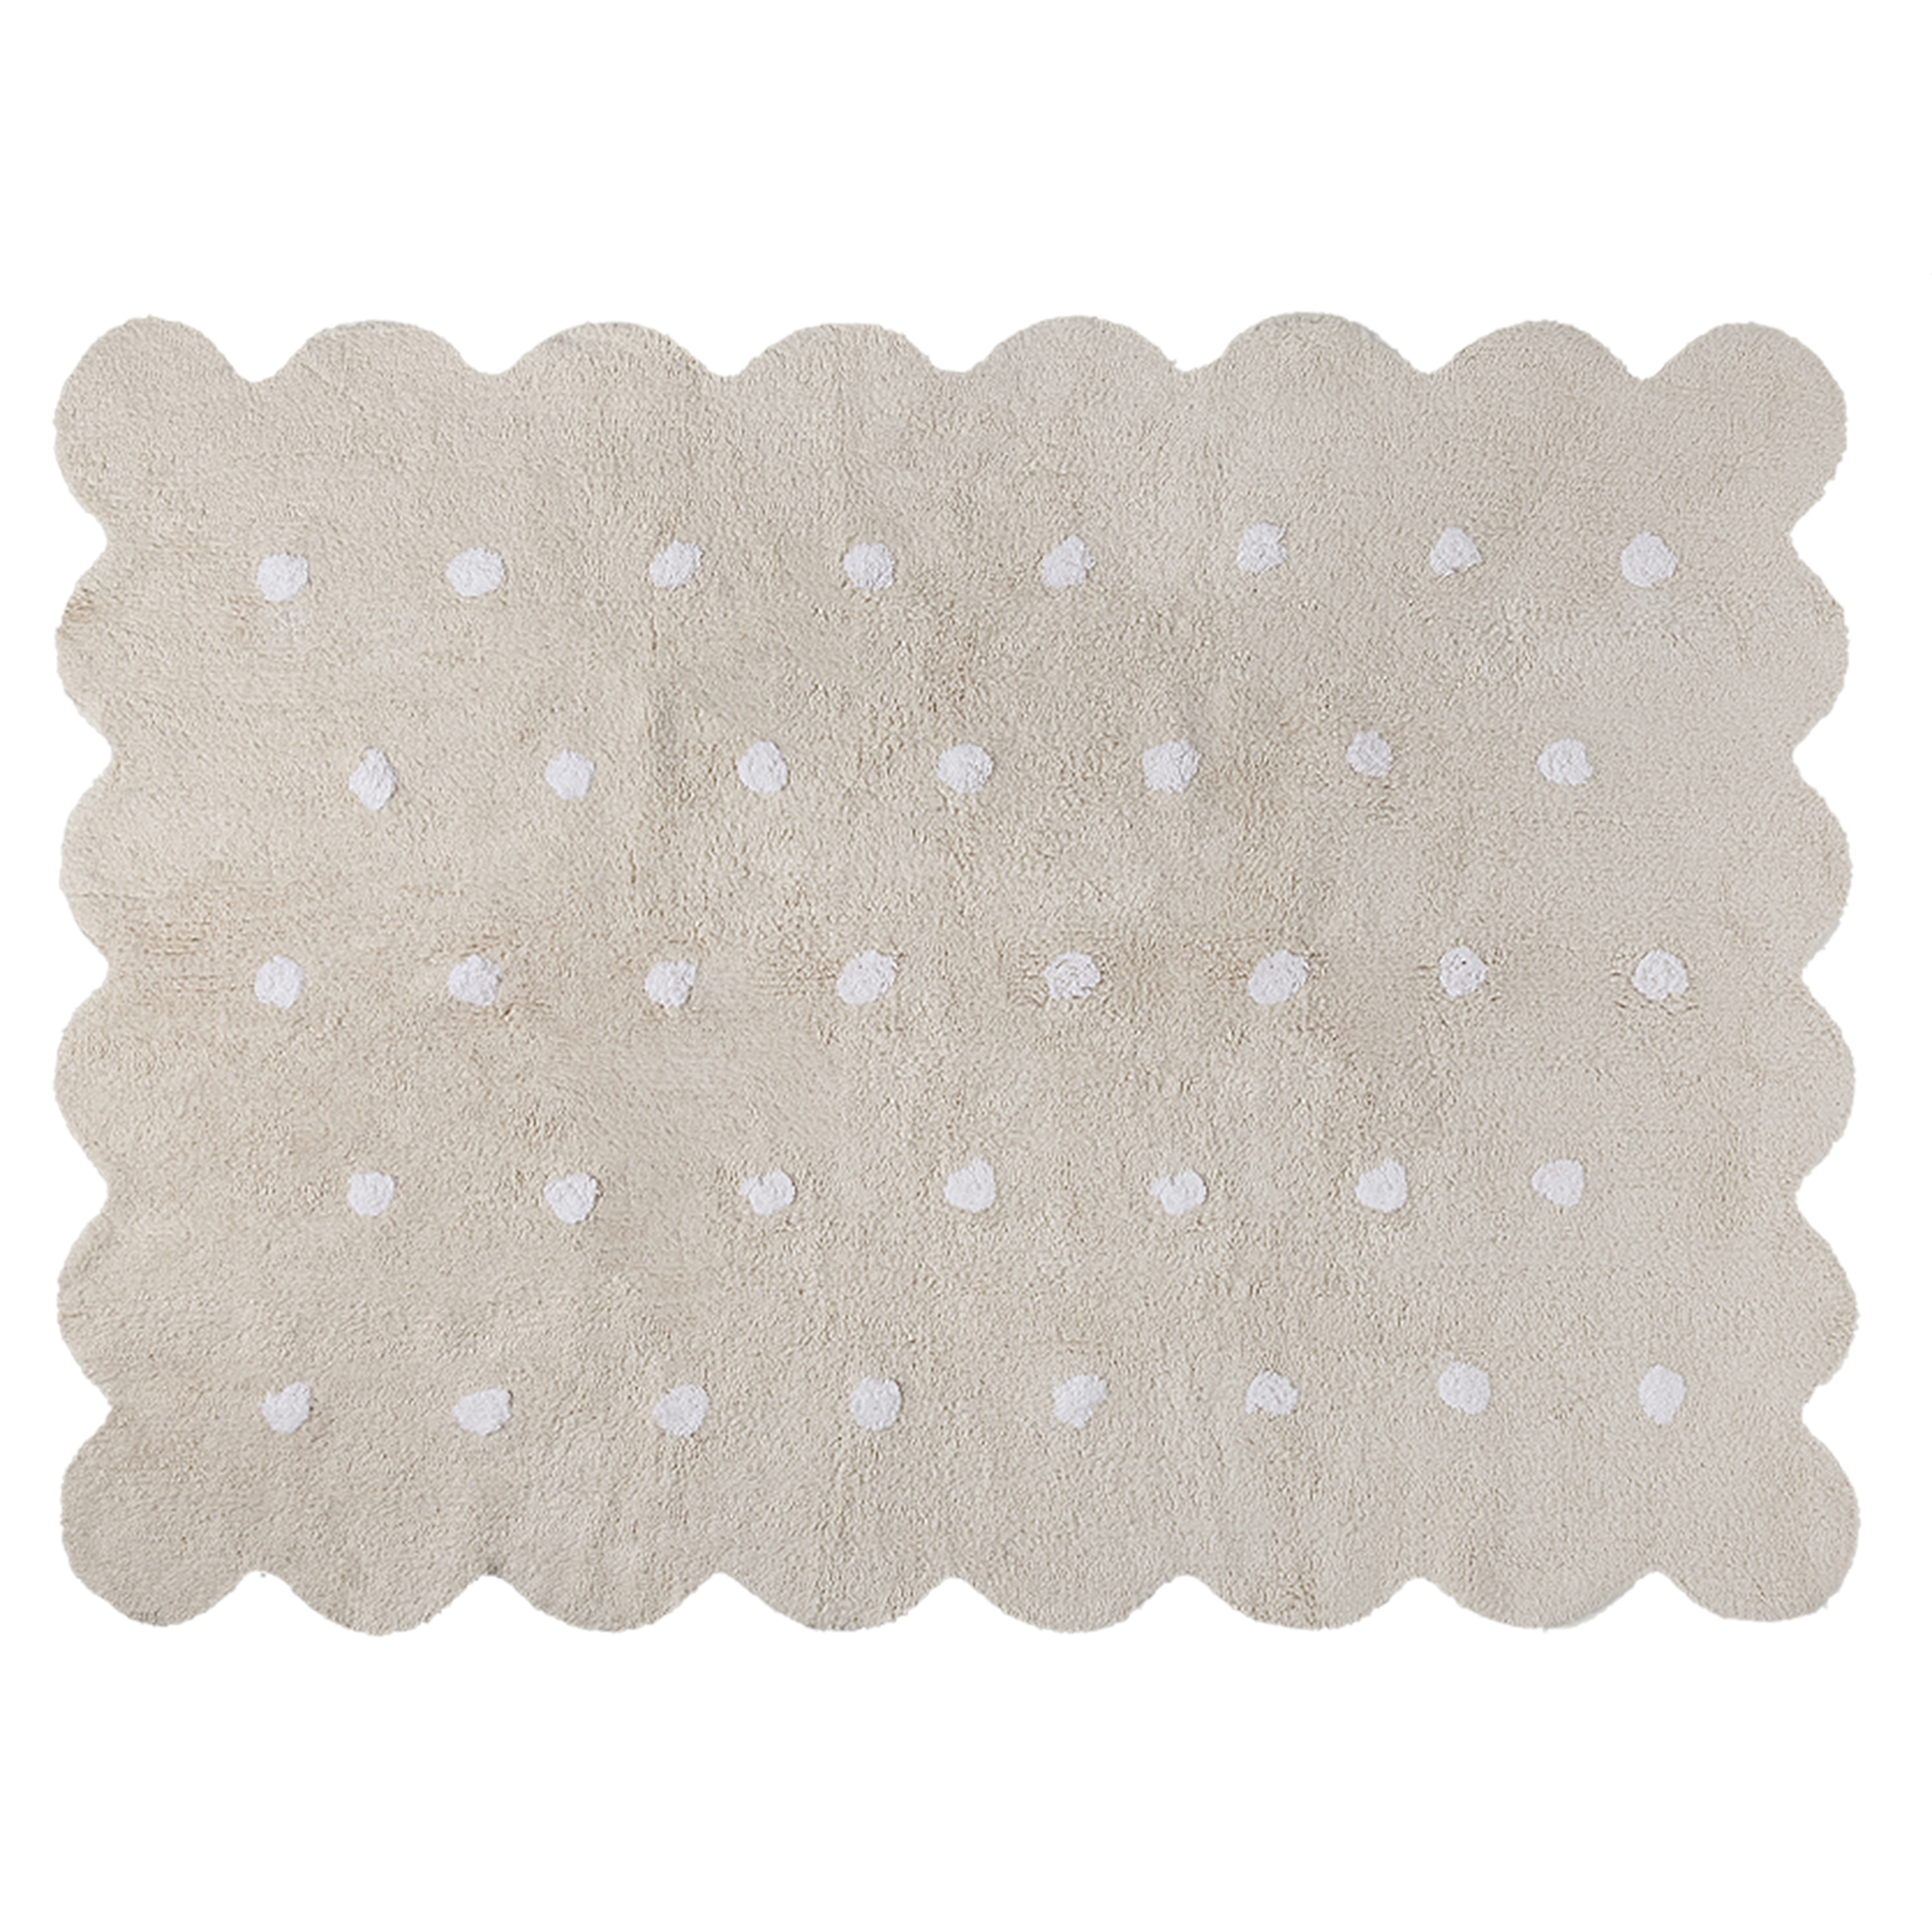 Tapis coton forme biscuit beige 120x160